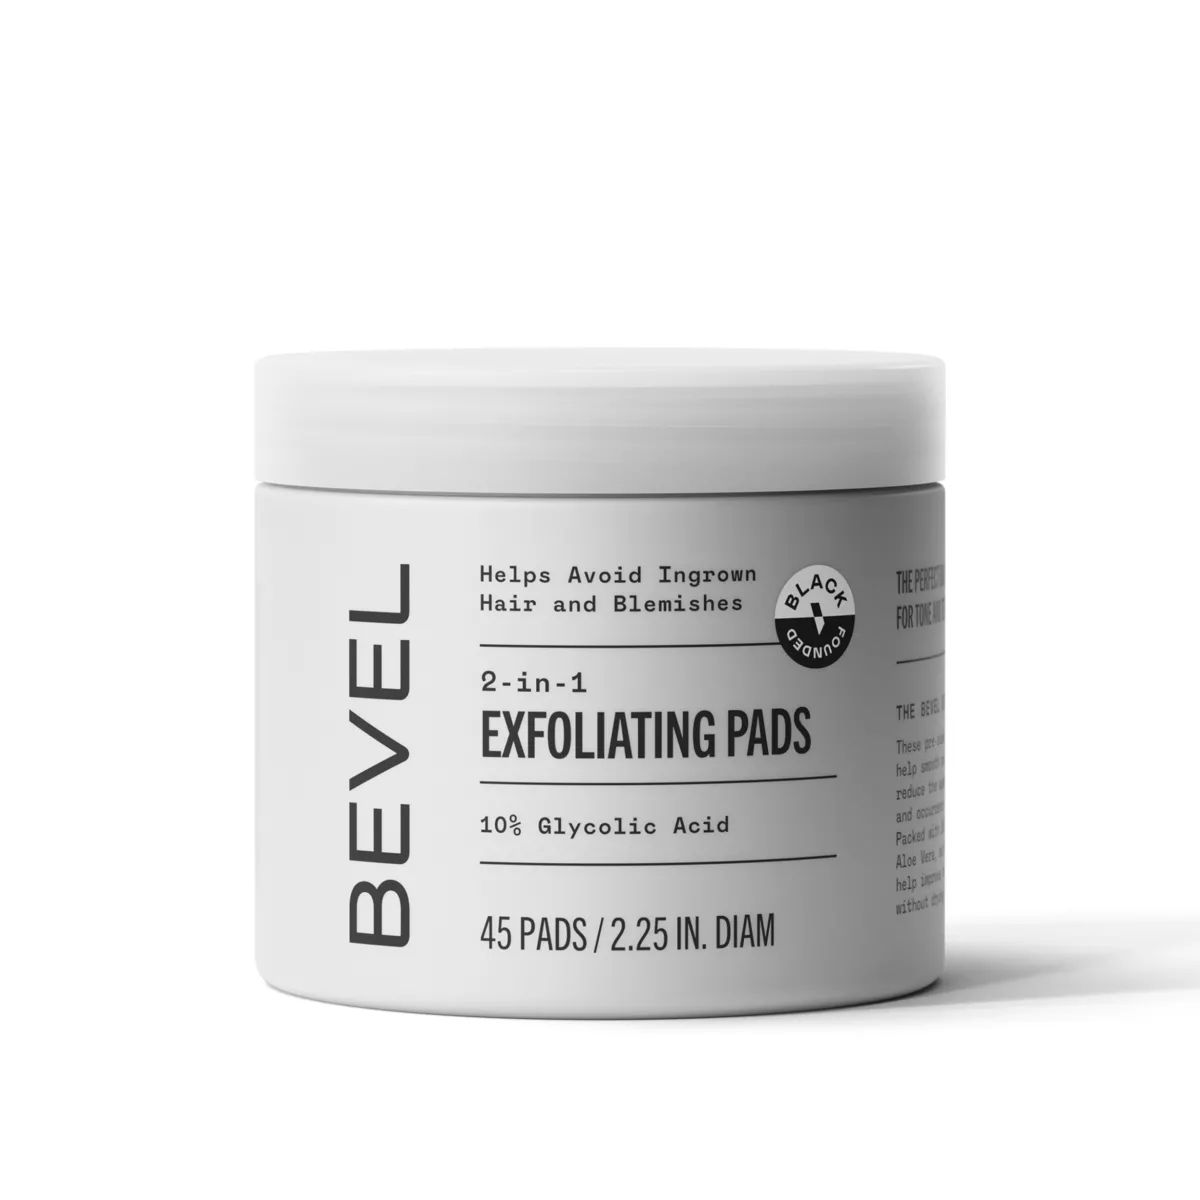 BEVEL Exfoliating 10% Glycolic Acid Toner Pads For Face with Green Tea and Lavender - 45ct | Target